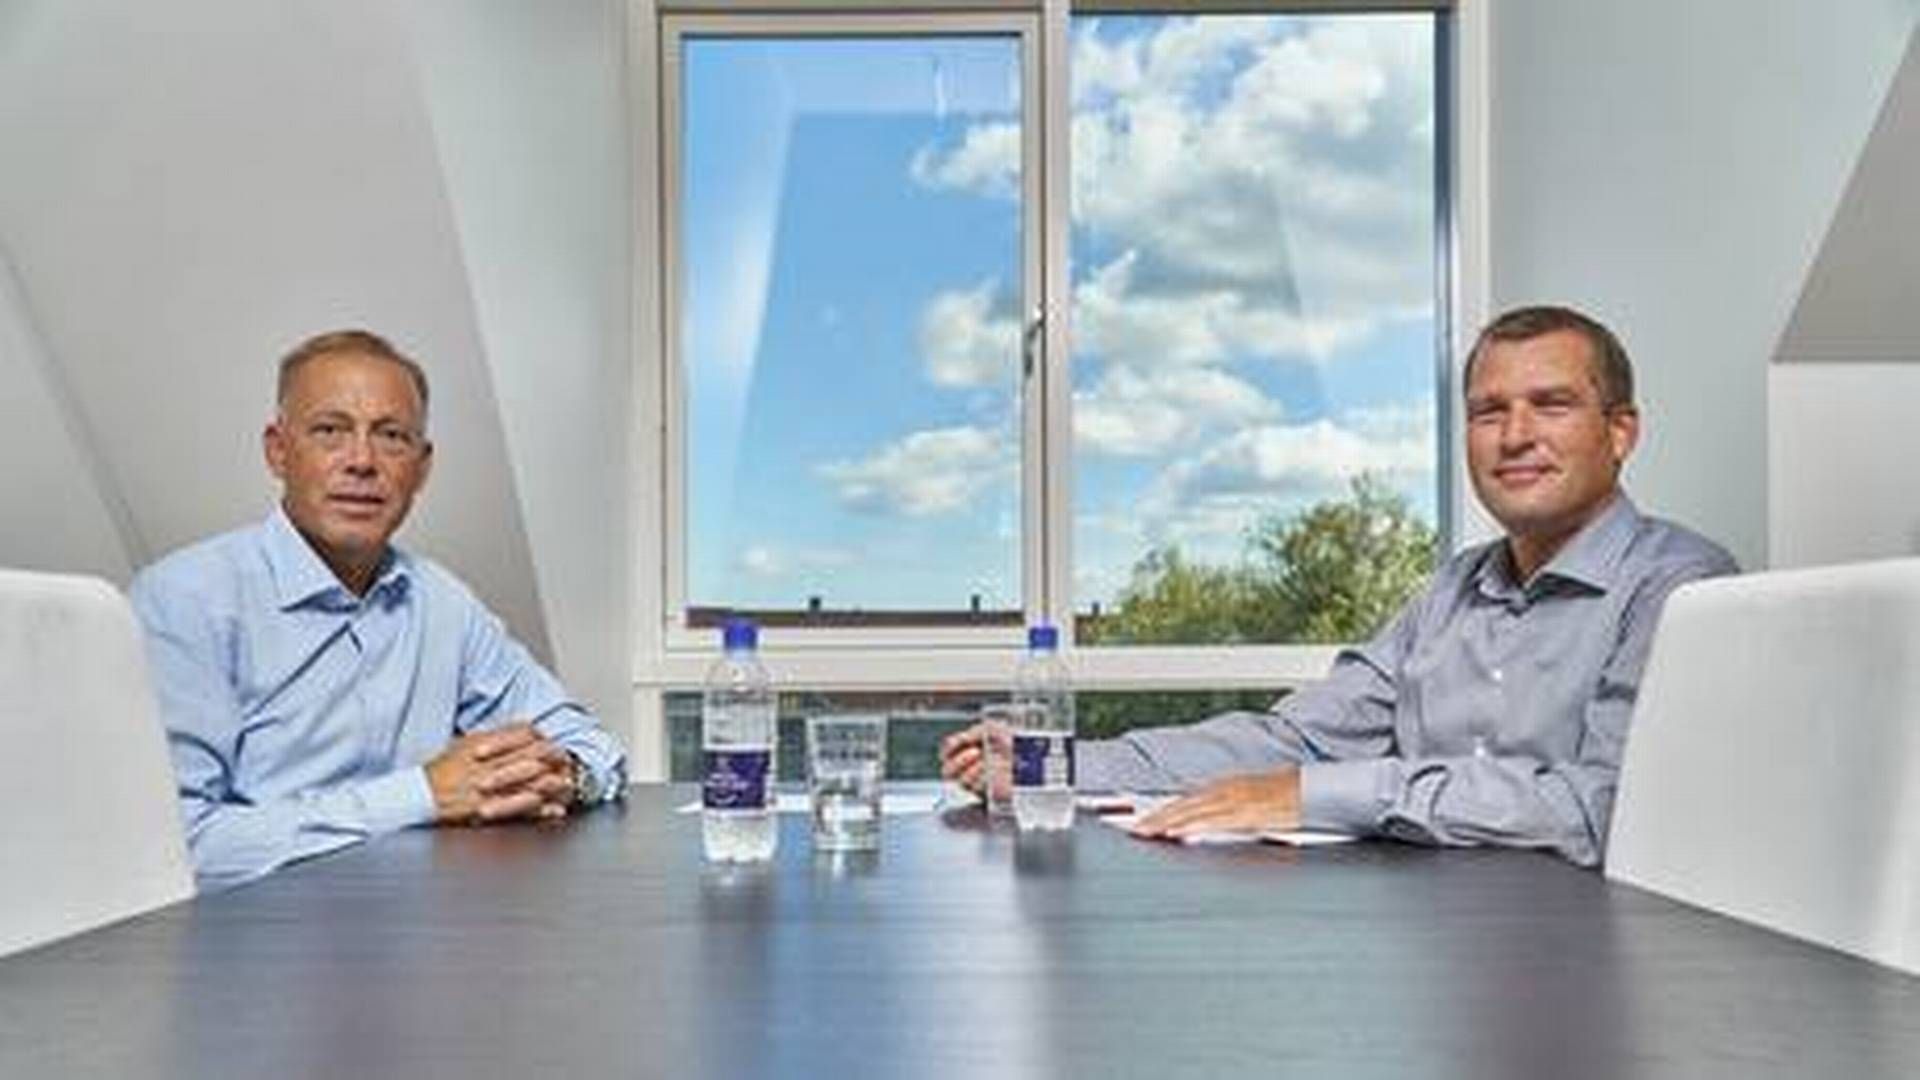 Chairman of the board owner of Cobi Rehab, Henrik Møllegaard Bjerre (left) and Kenneth Vendelbo Schnoor, who has been acting director at the company in 2019. | Foto: Cobi Rehab/PR